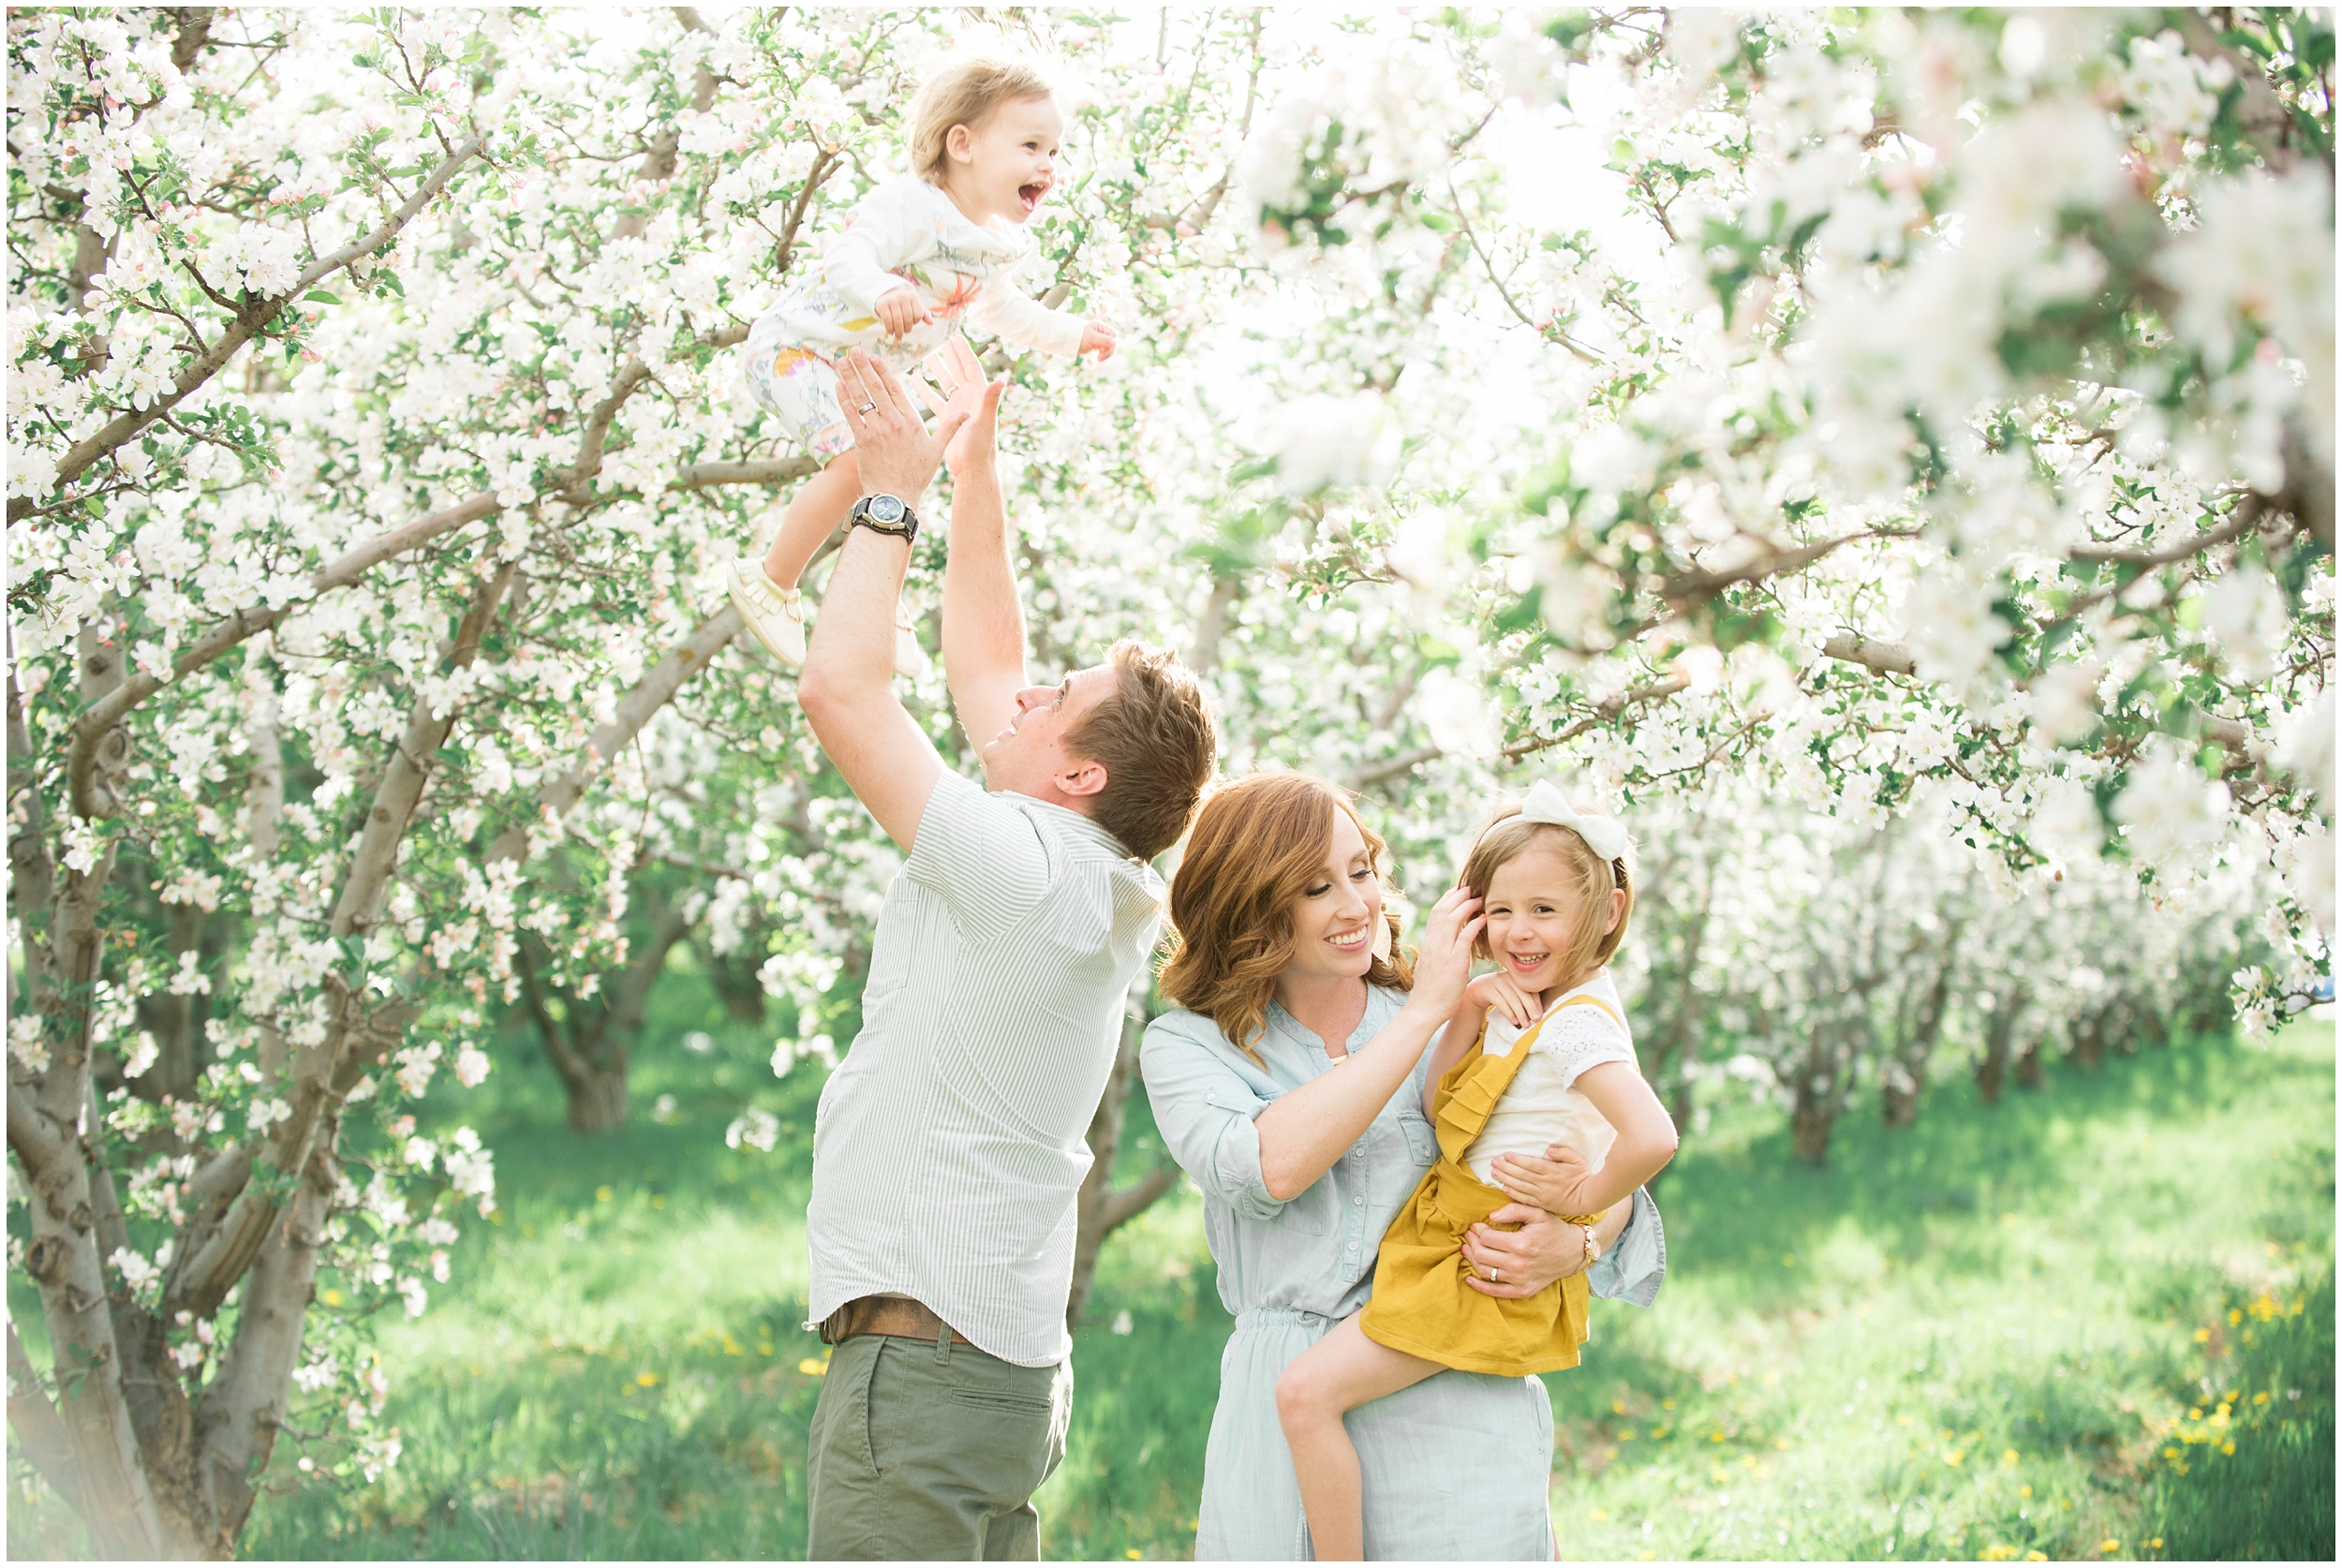 Family photographer, spring blossoms, play blue and yellow, orchard photos, Utah wedding photographers, Utah wedding photographer, Utah wedding photography, Utah county wedding photography, Utah county wedding photographer, salt lake city photographers, salt lake city wedding photography, salt lake photographers, salt lake city photographers, photographers in Utah, Utah photography, photography Utah, photographer Utah, Kristina Curtis photography, Kristina Curtis Photographer, www.kristinacurtisphotography.com